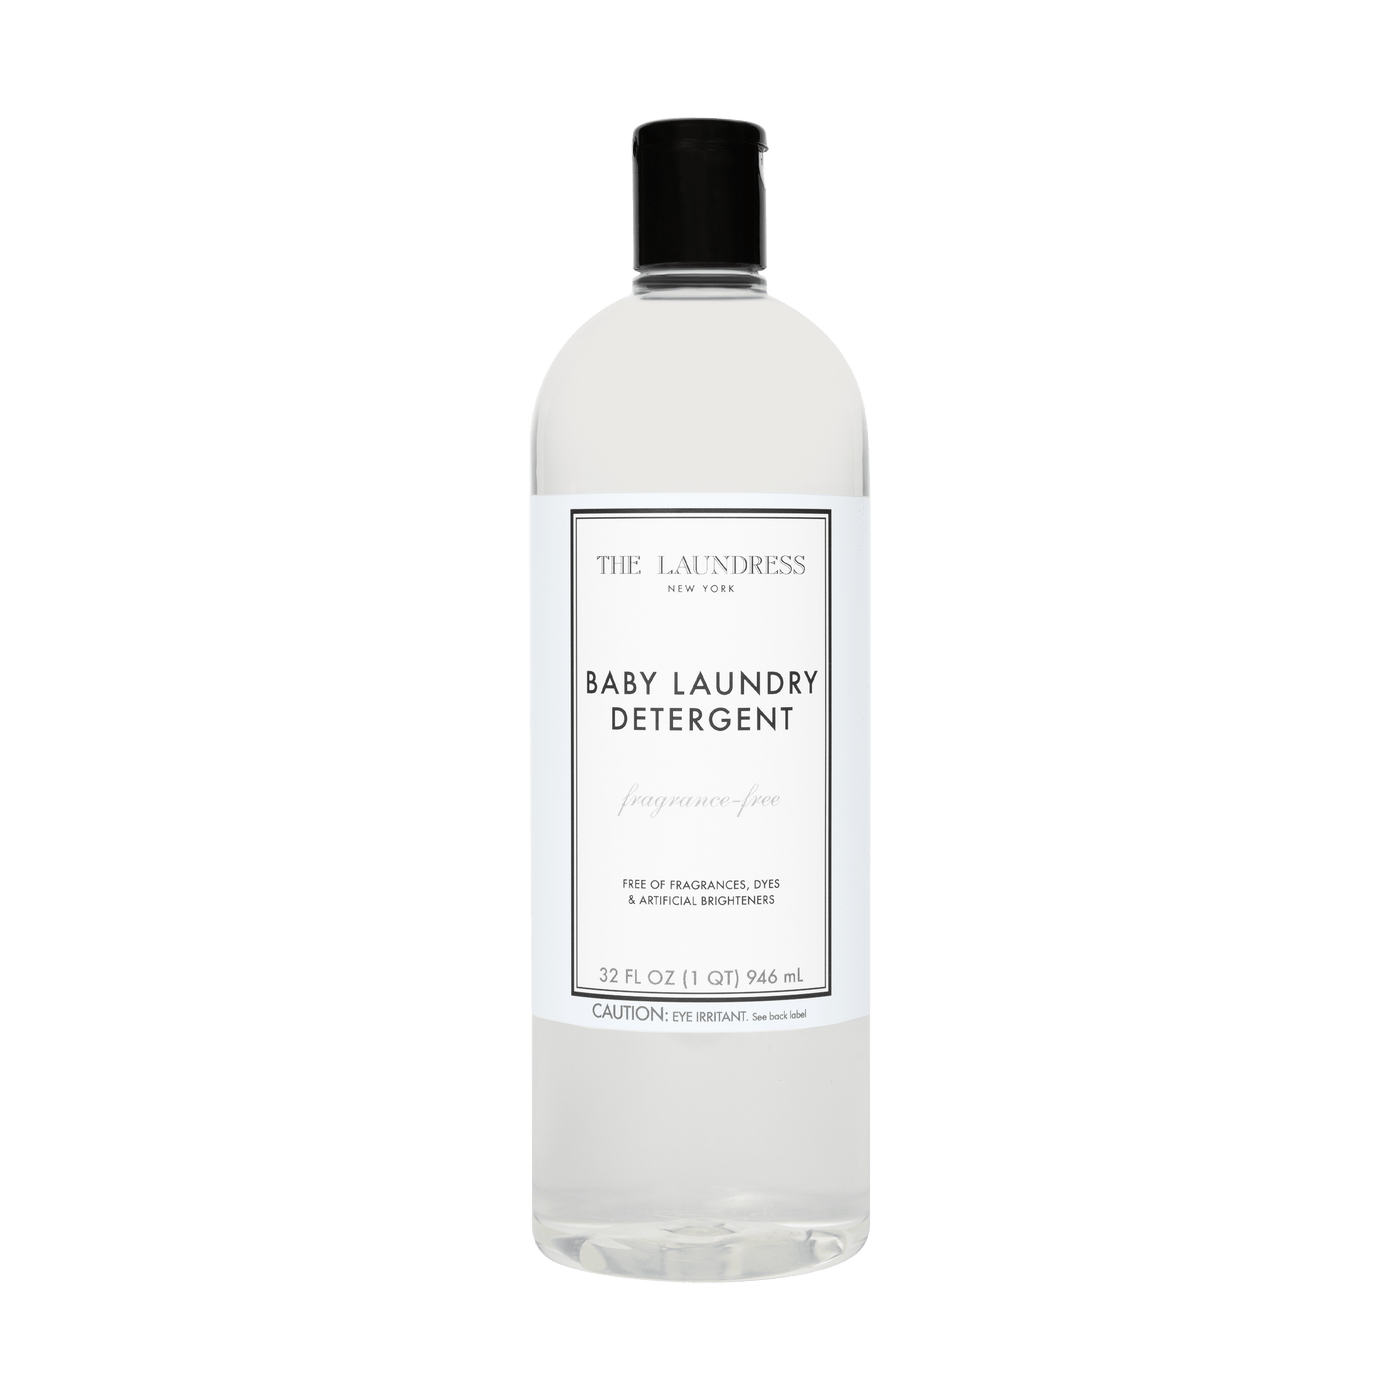 Fragrance Free Baby Laundry Detergent Household Supplies The Laundress